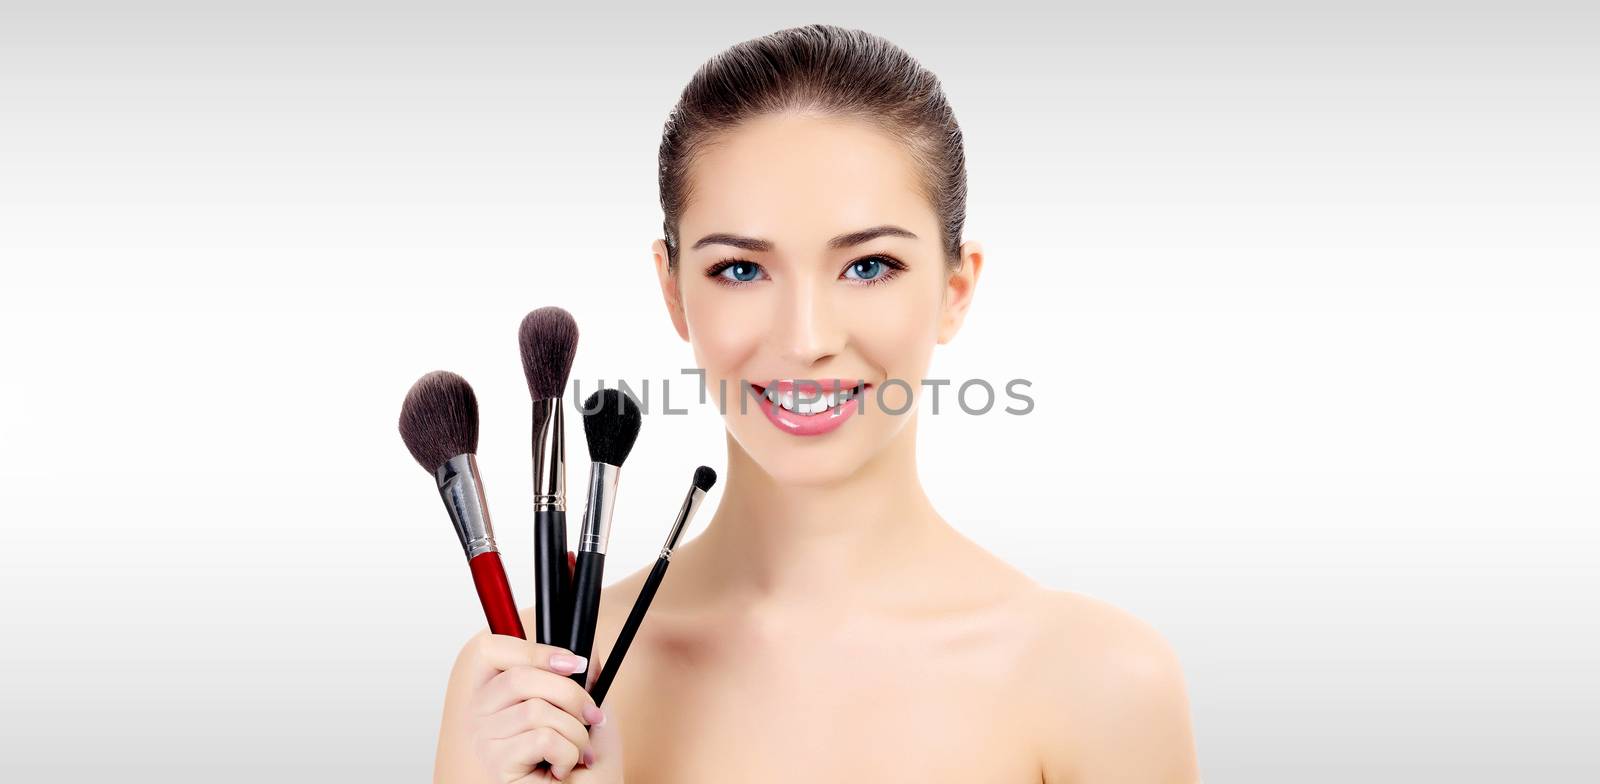 Pretty woman with makeup brushes against a grey background with copyspace